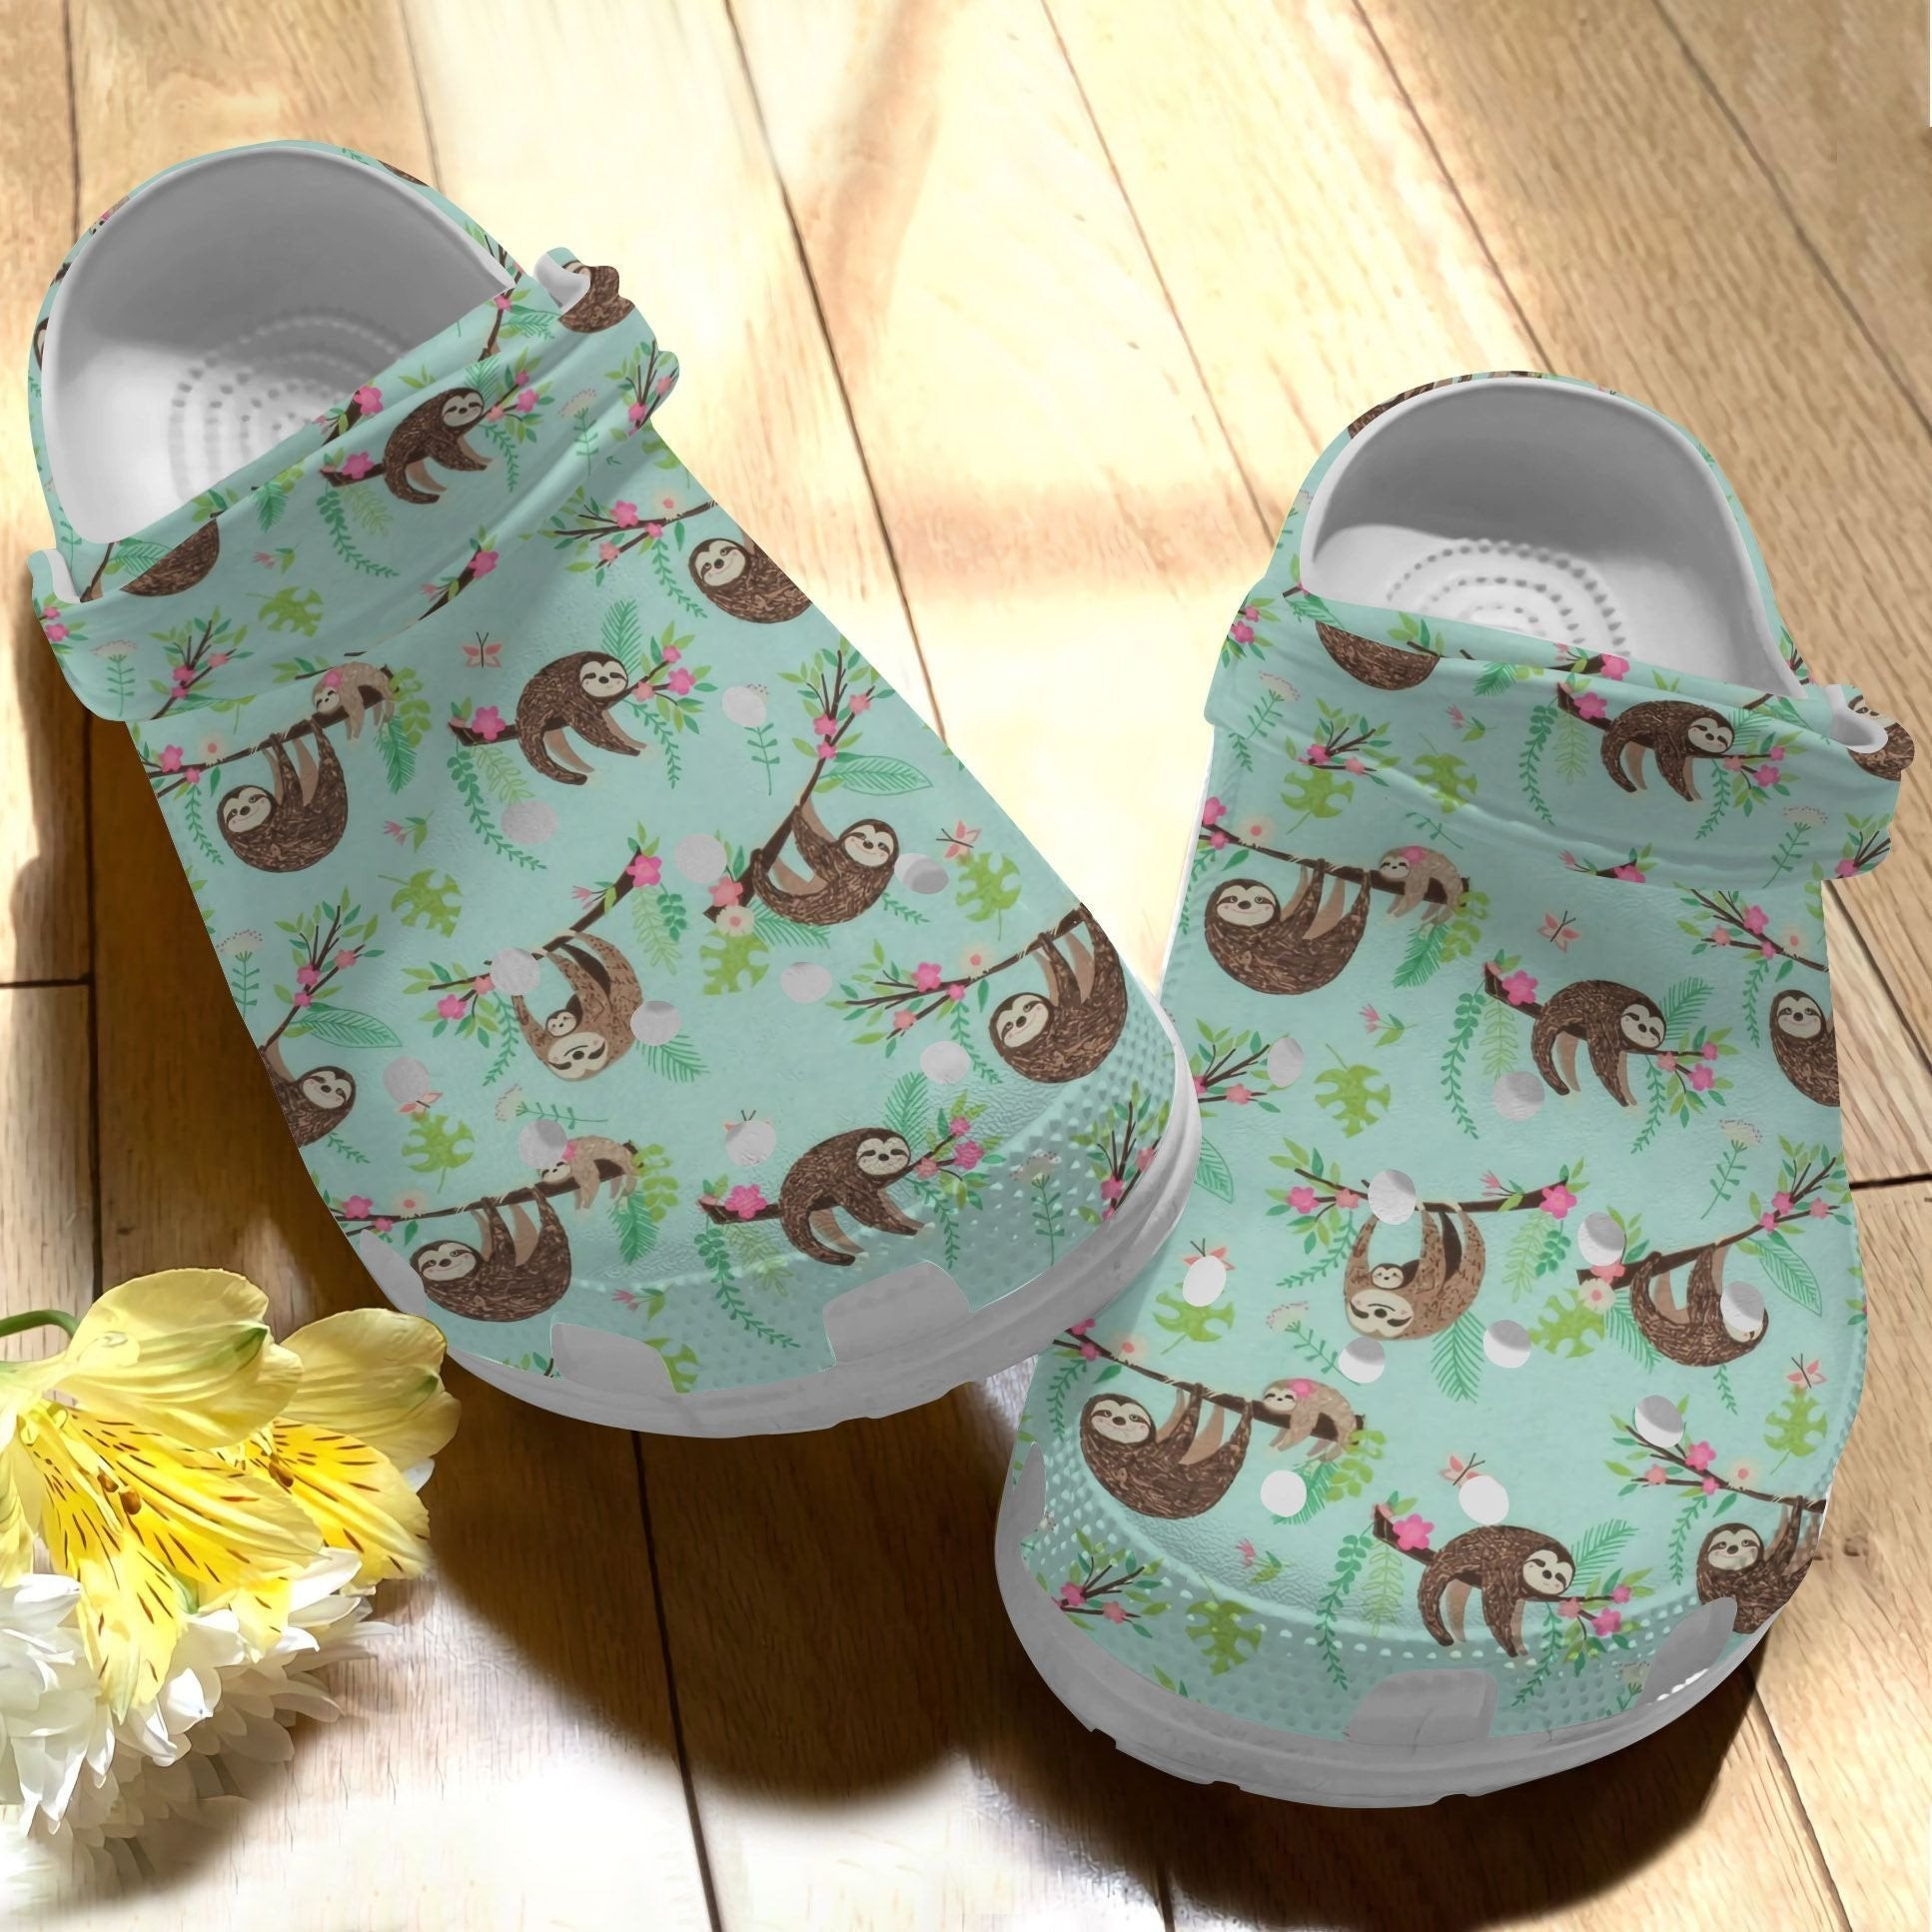 Lovely Sloth Sloths Crocs Shoes Crocbland Clogs Birthday Gift For Children